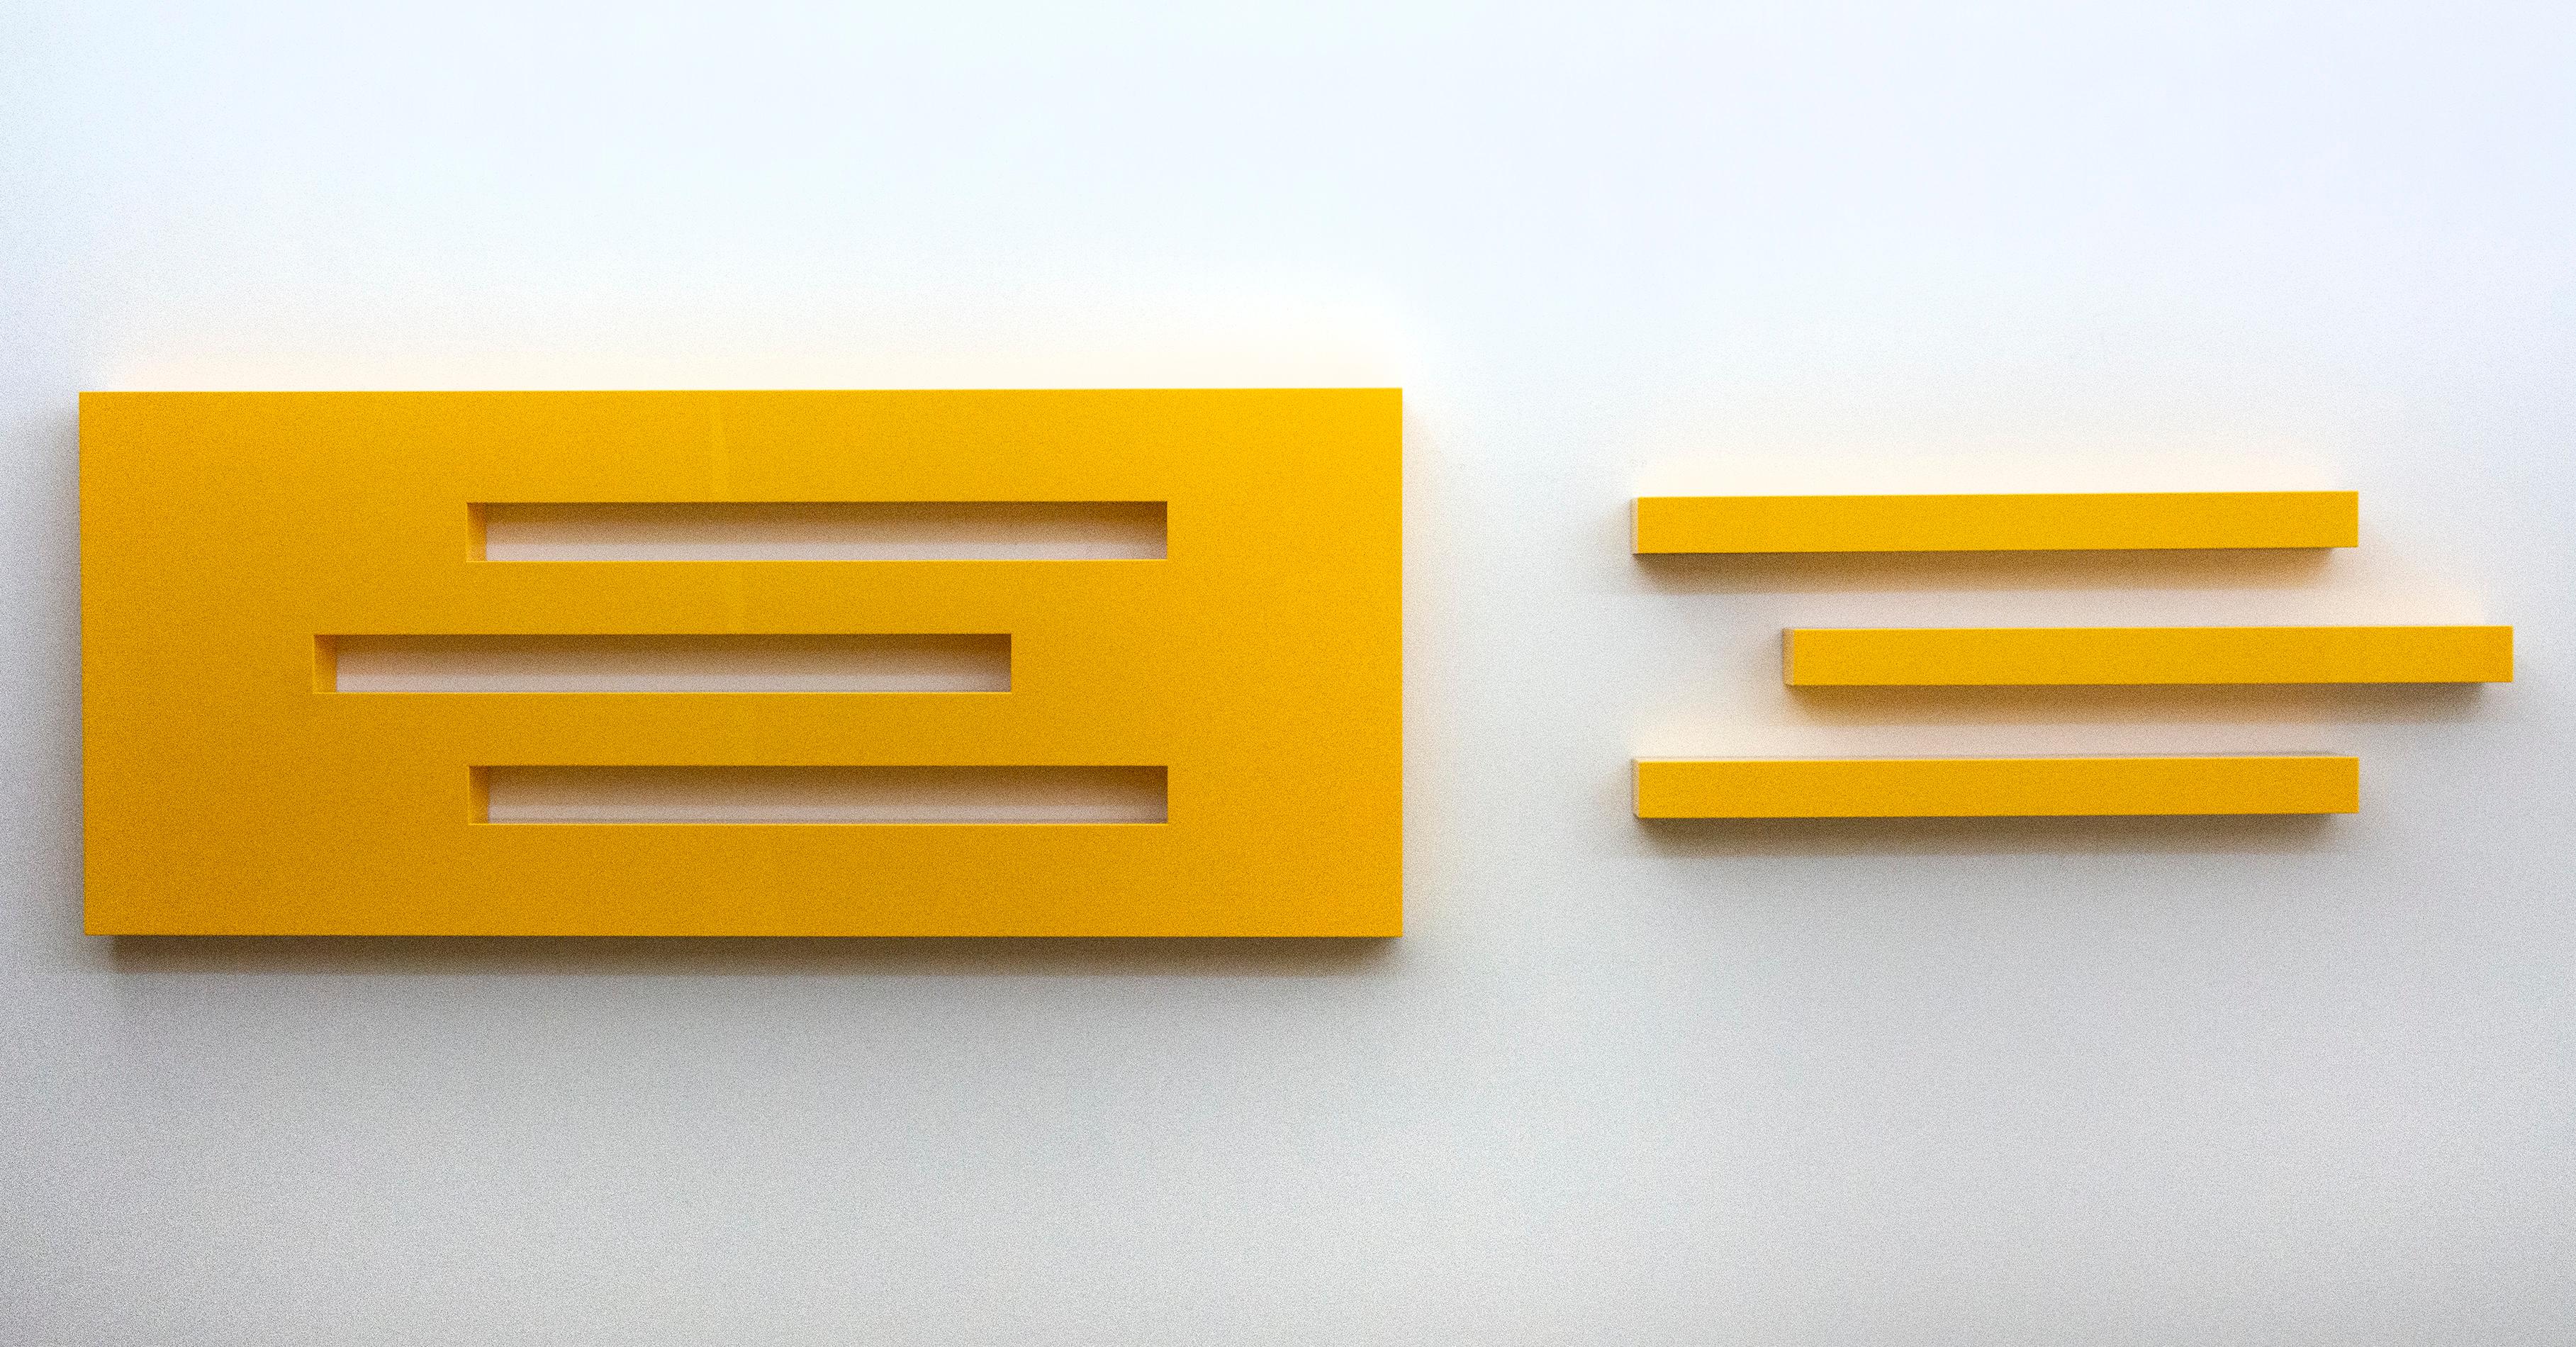 Foundations, Yellow - large, smooth, bright, glossy, abstract wall sculpture - Sculpture by  Lori Cozen-Geller